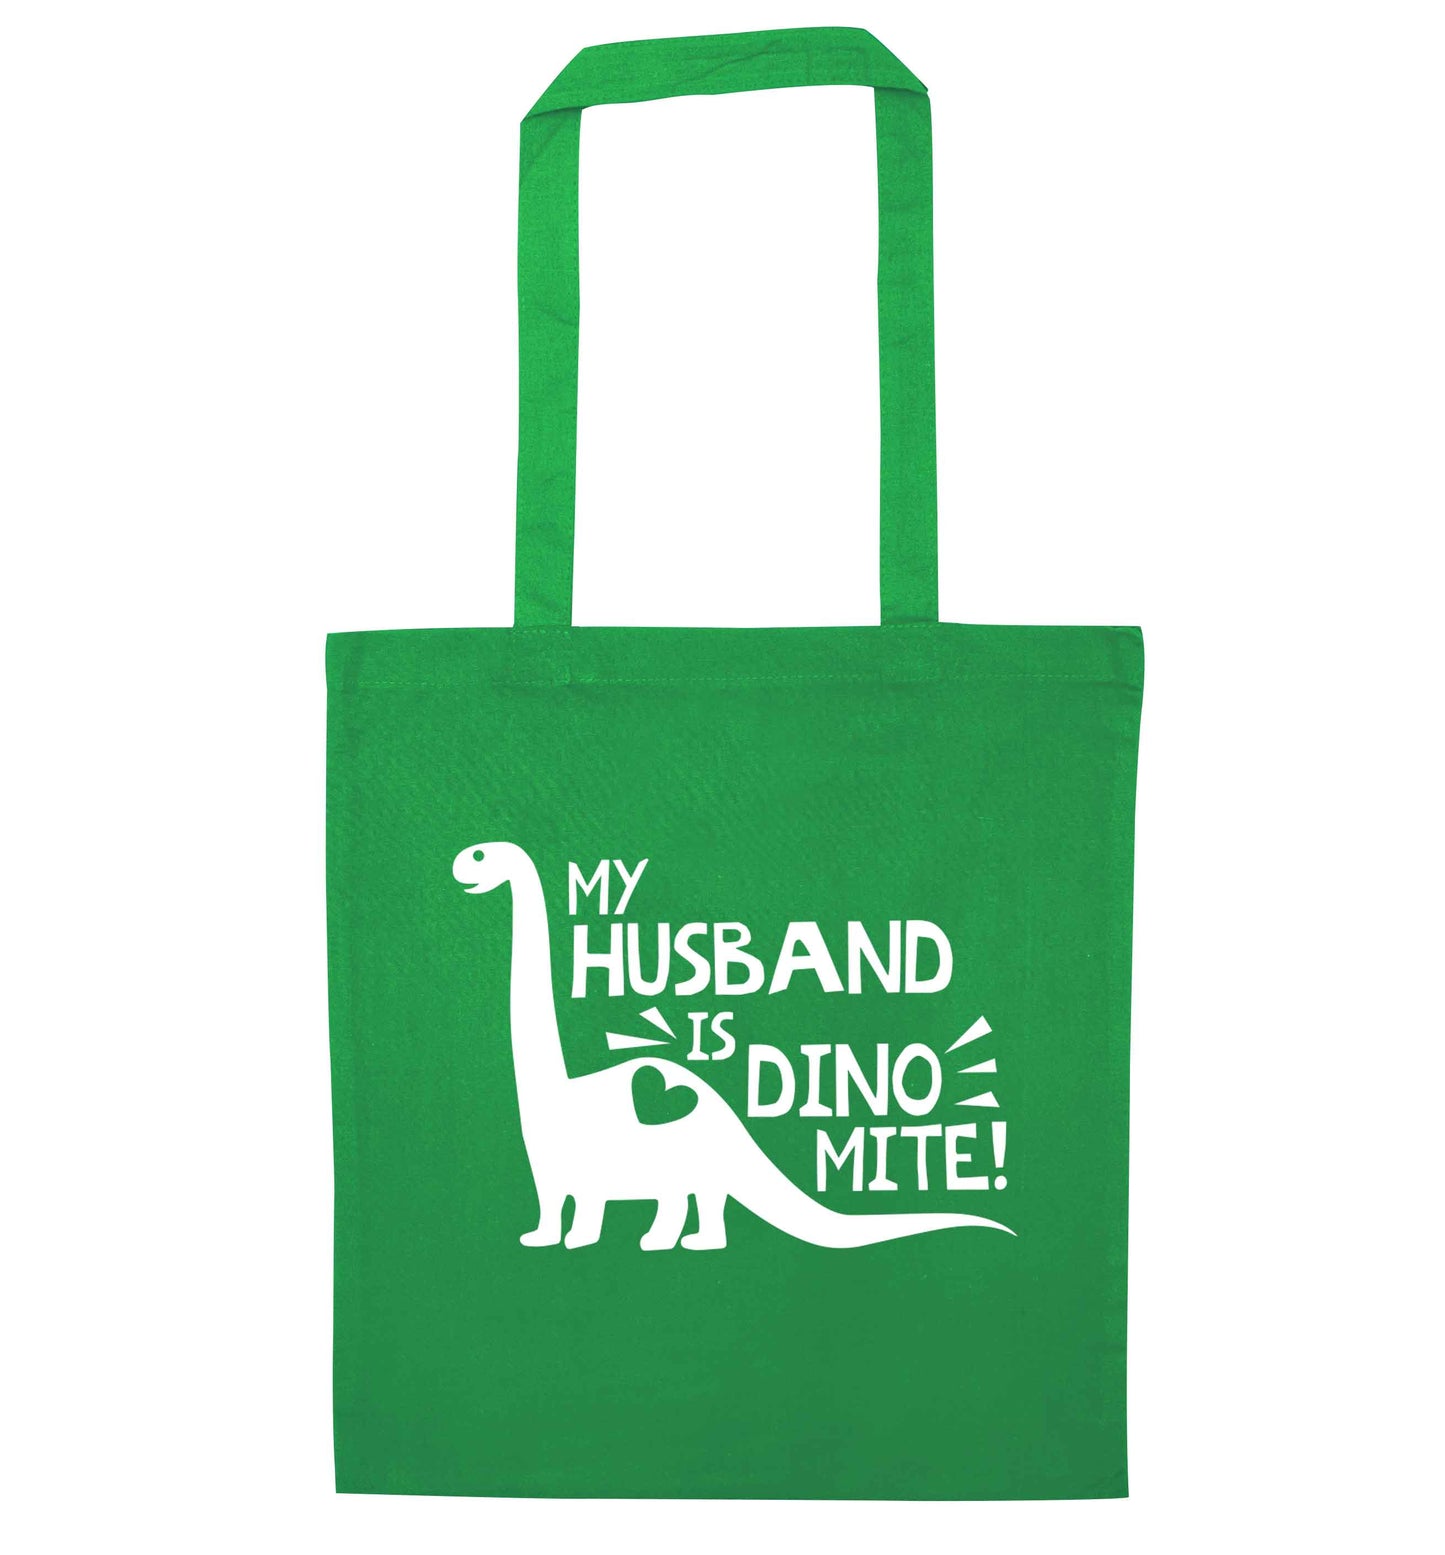 My husband is dinomite! green tote bag